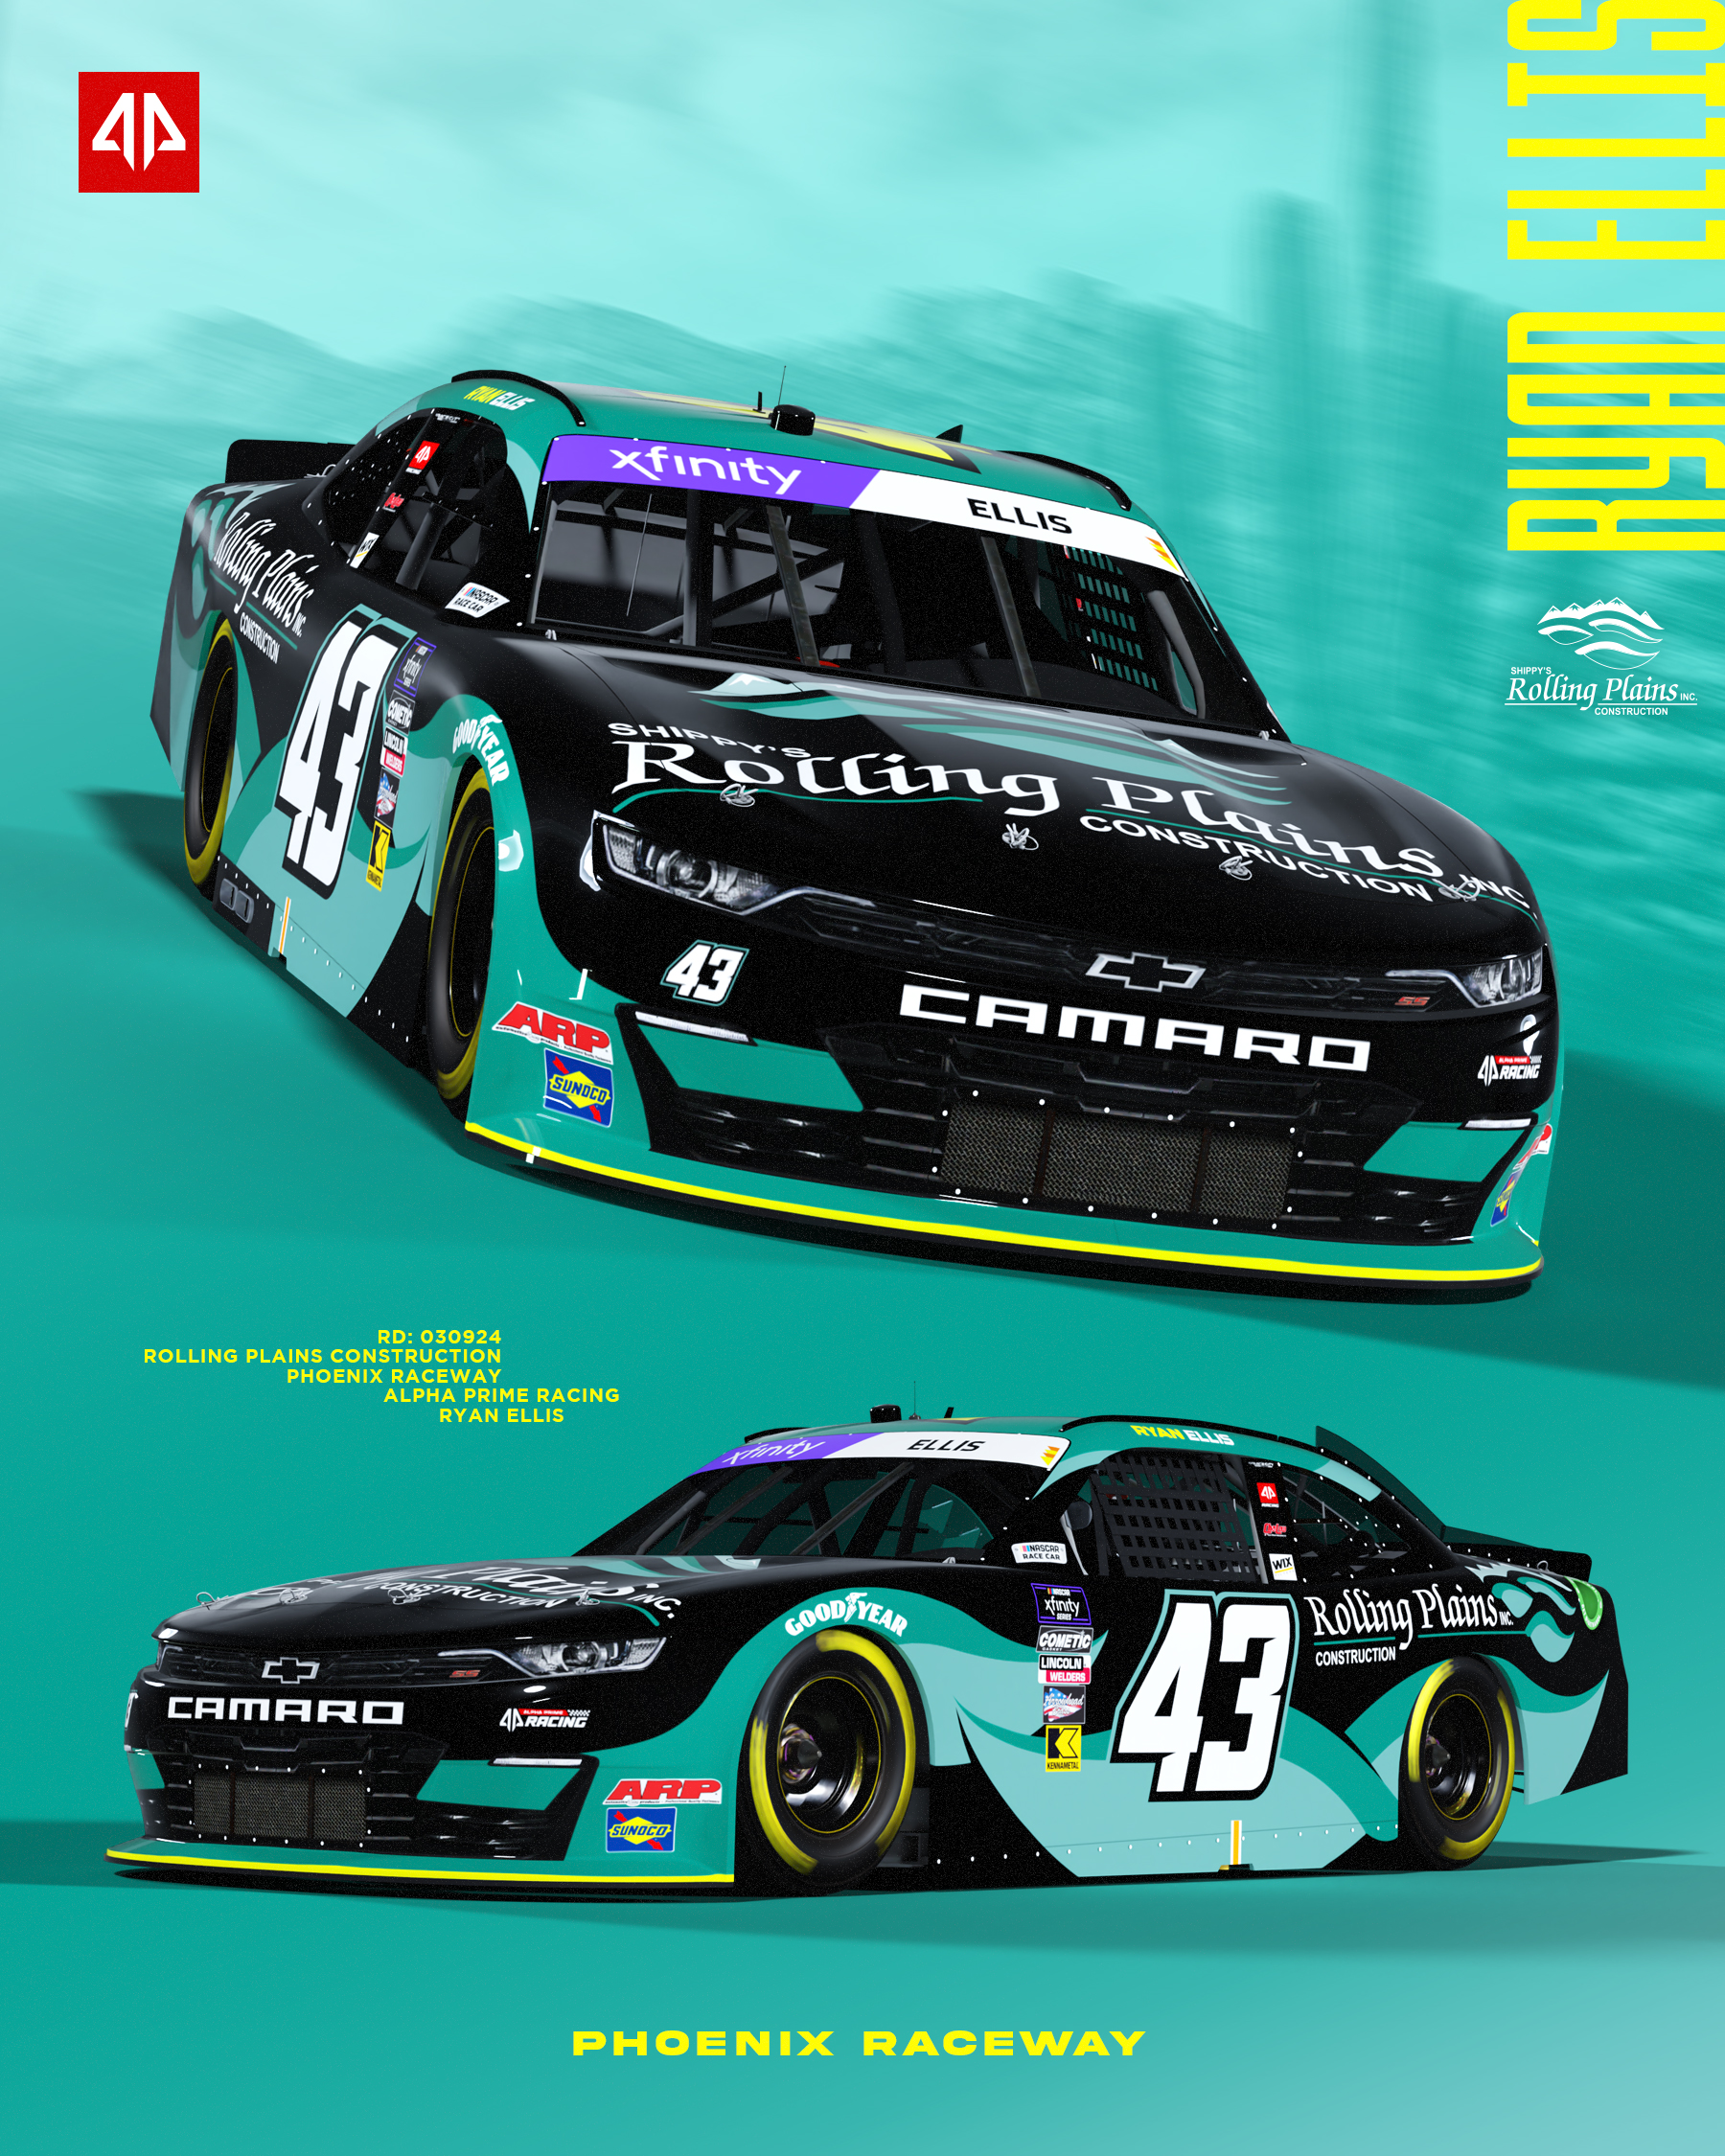 Rolling Plains Construction re-signs for Phoenix primary sponsorship with Ellis, Alpha Prime Racing